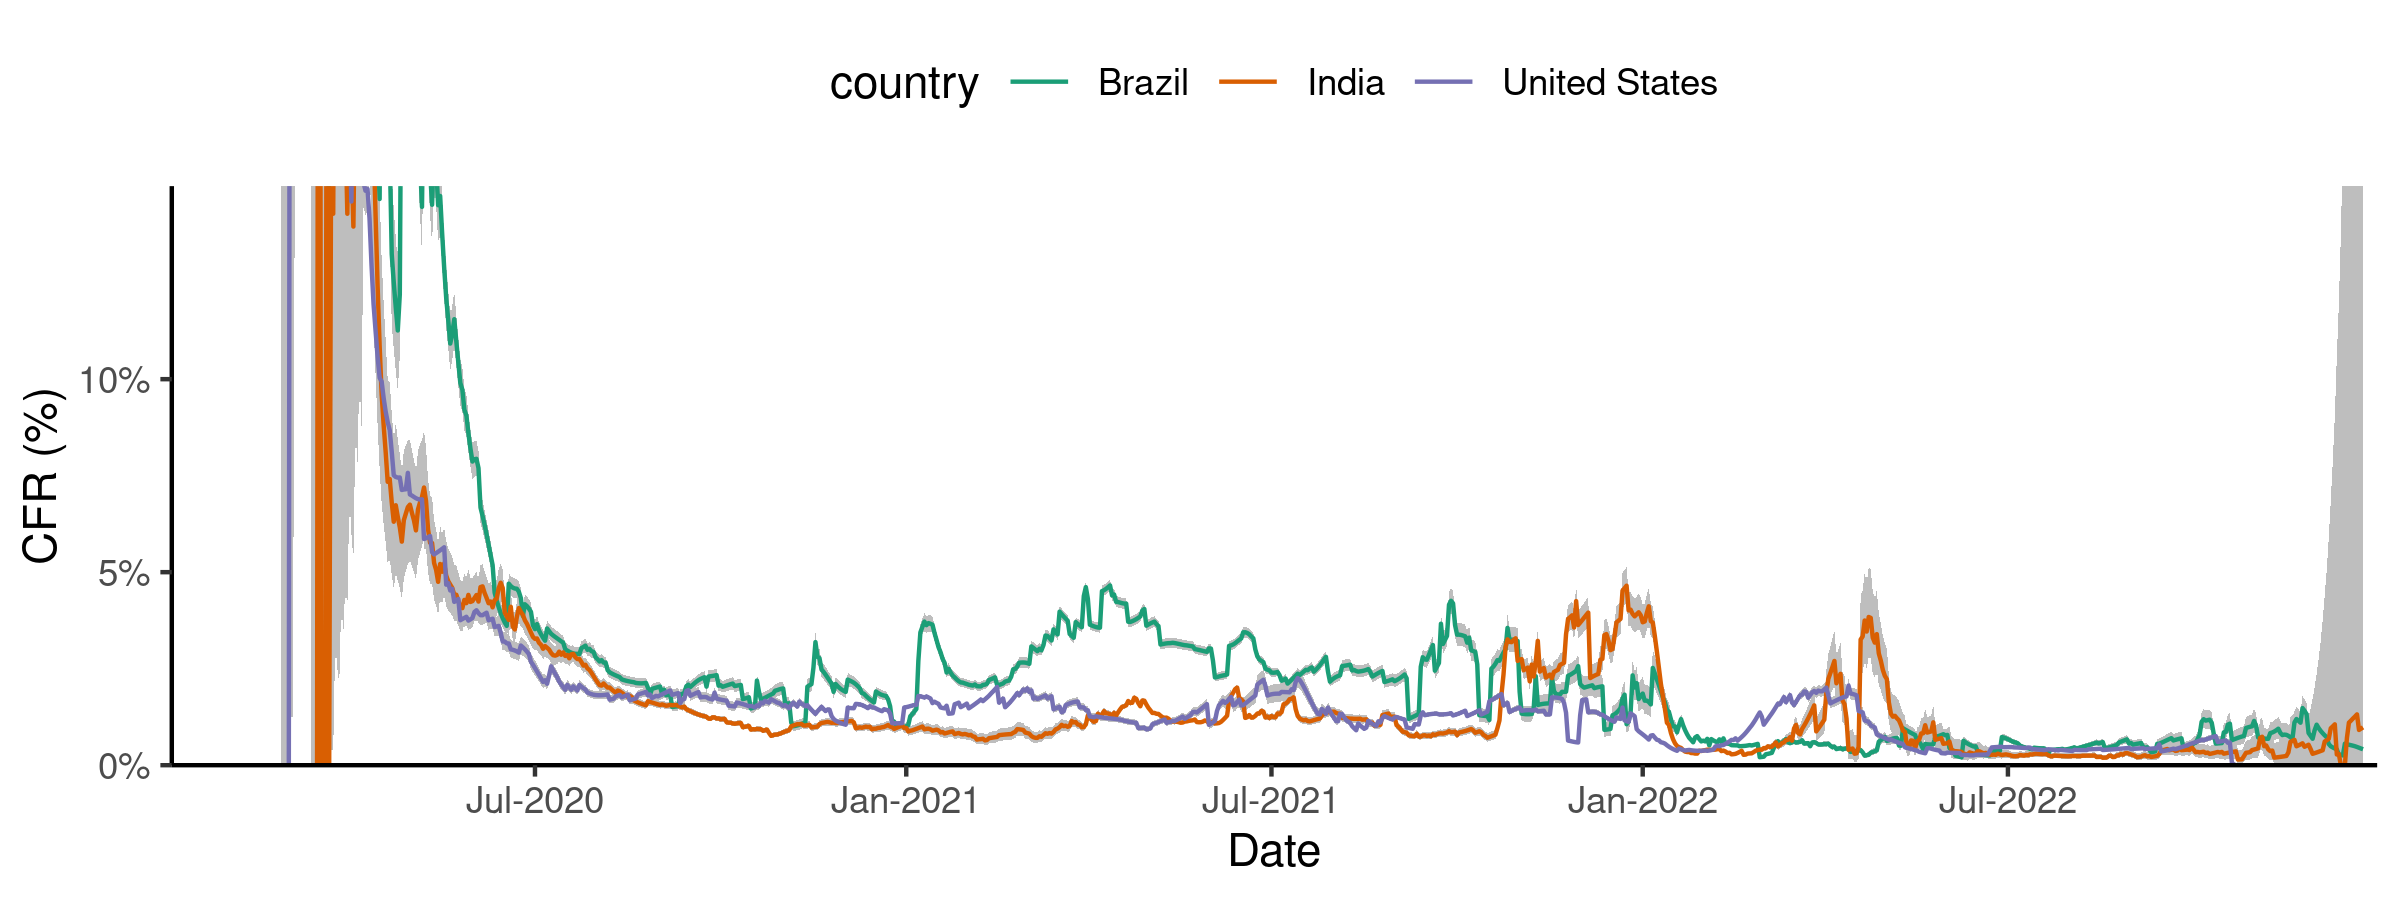 Example plot of the corrected time-varying CFR. We calculate the time-varying CFR for the Covid-19 pandemic in Brazil, India, and the United States, corrected for delays.